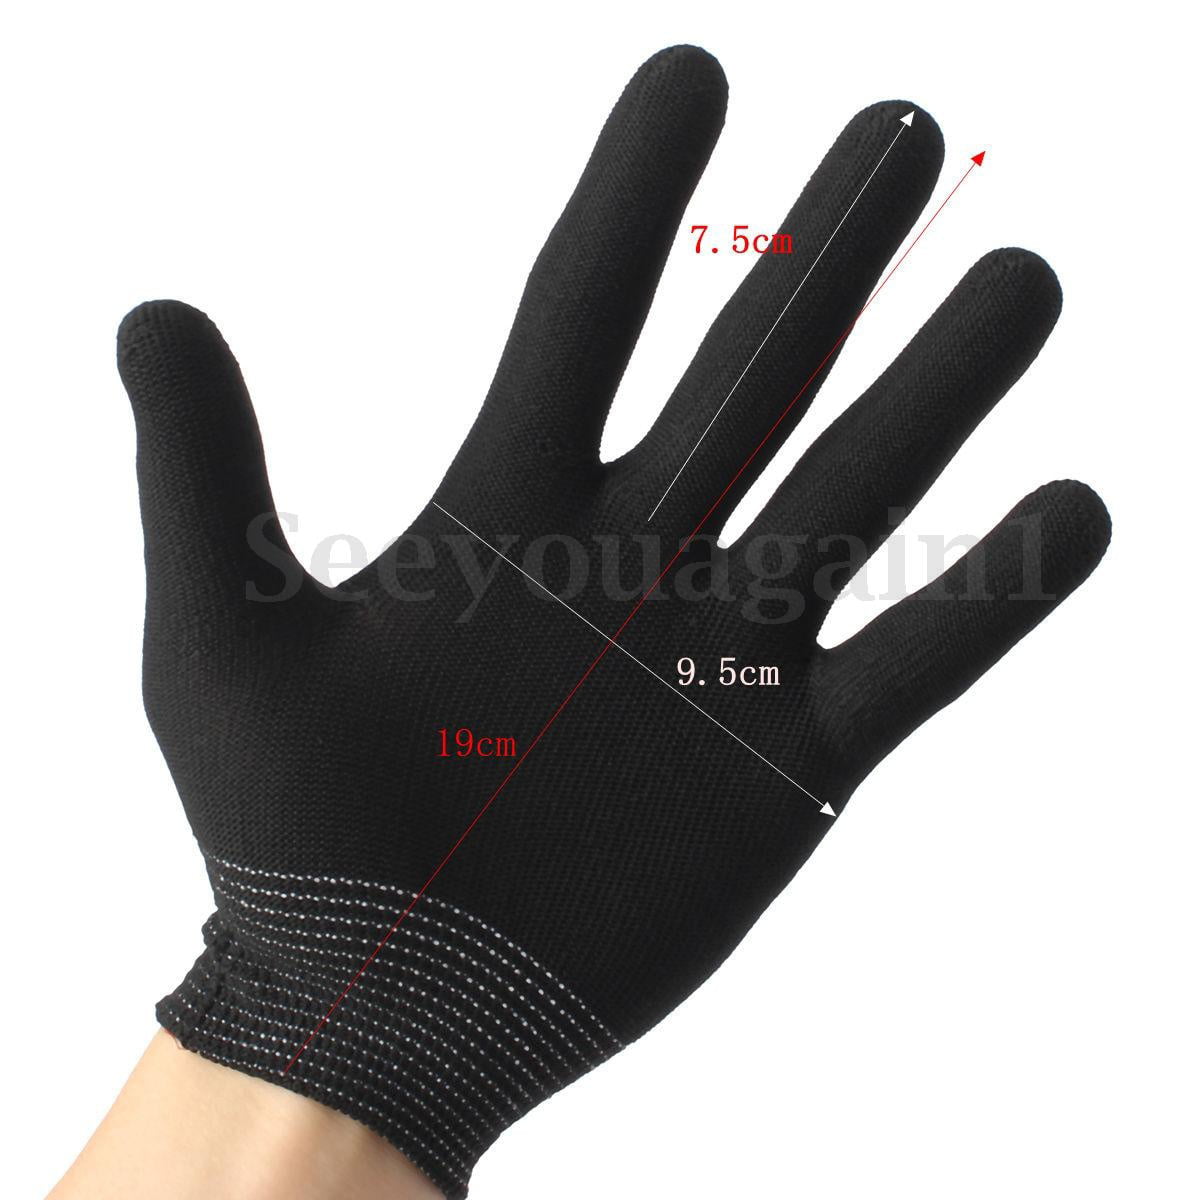 10 Pair Antistatic Inspection Work Gloves Nylon Knit Working Safety Grip Woke as